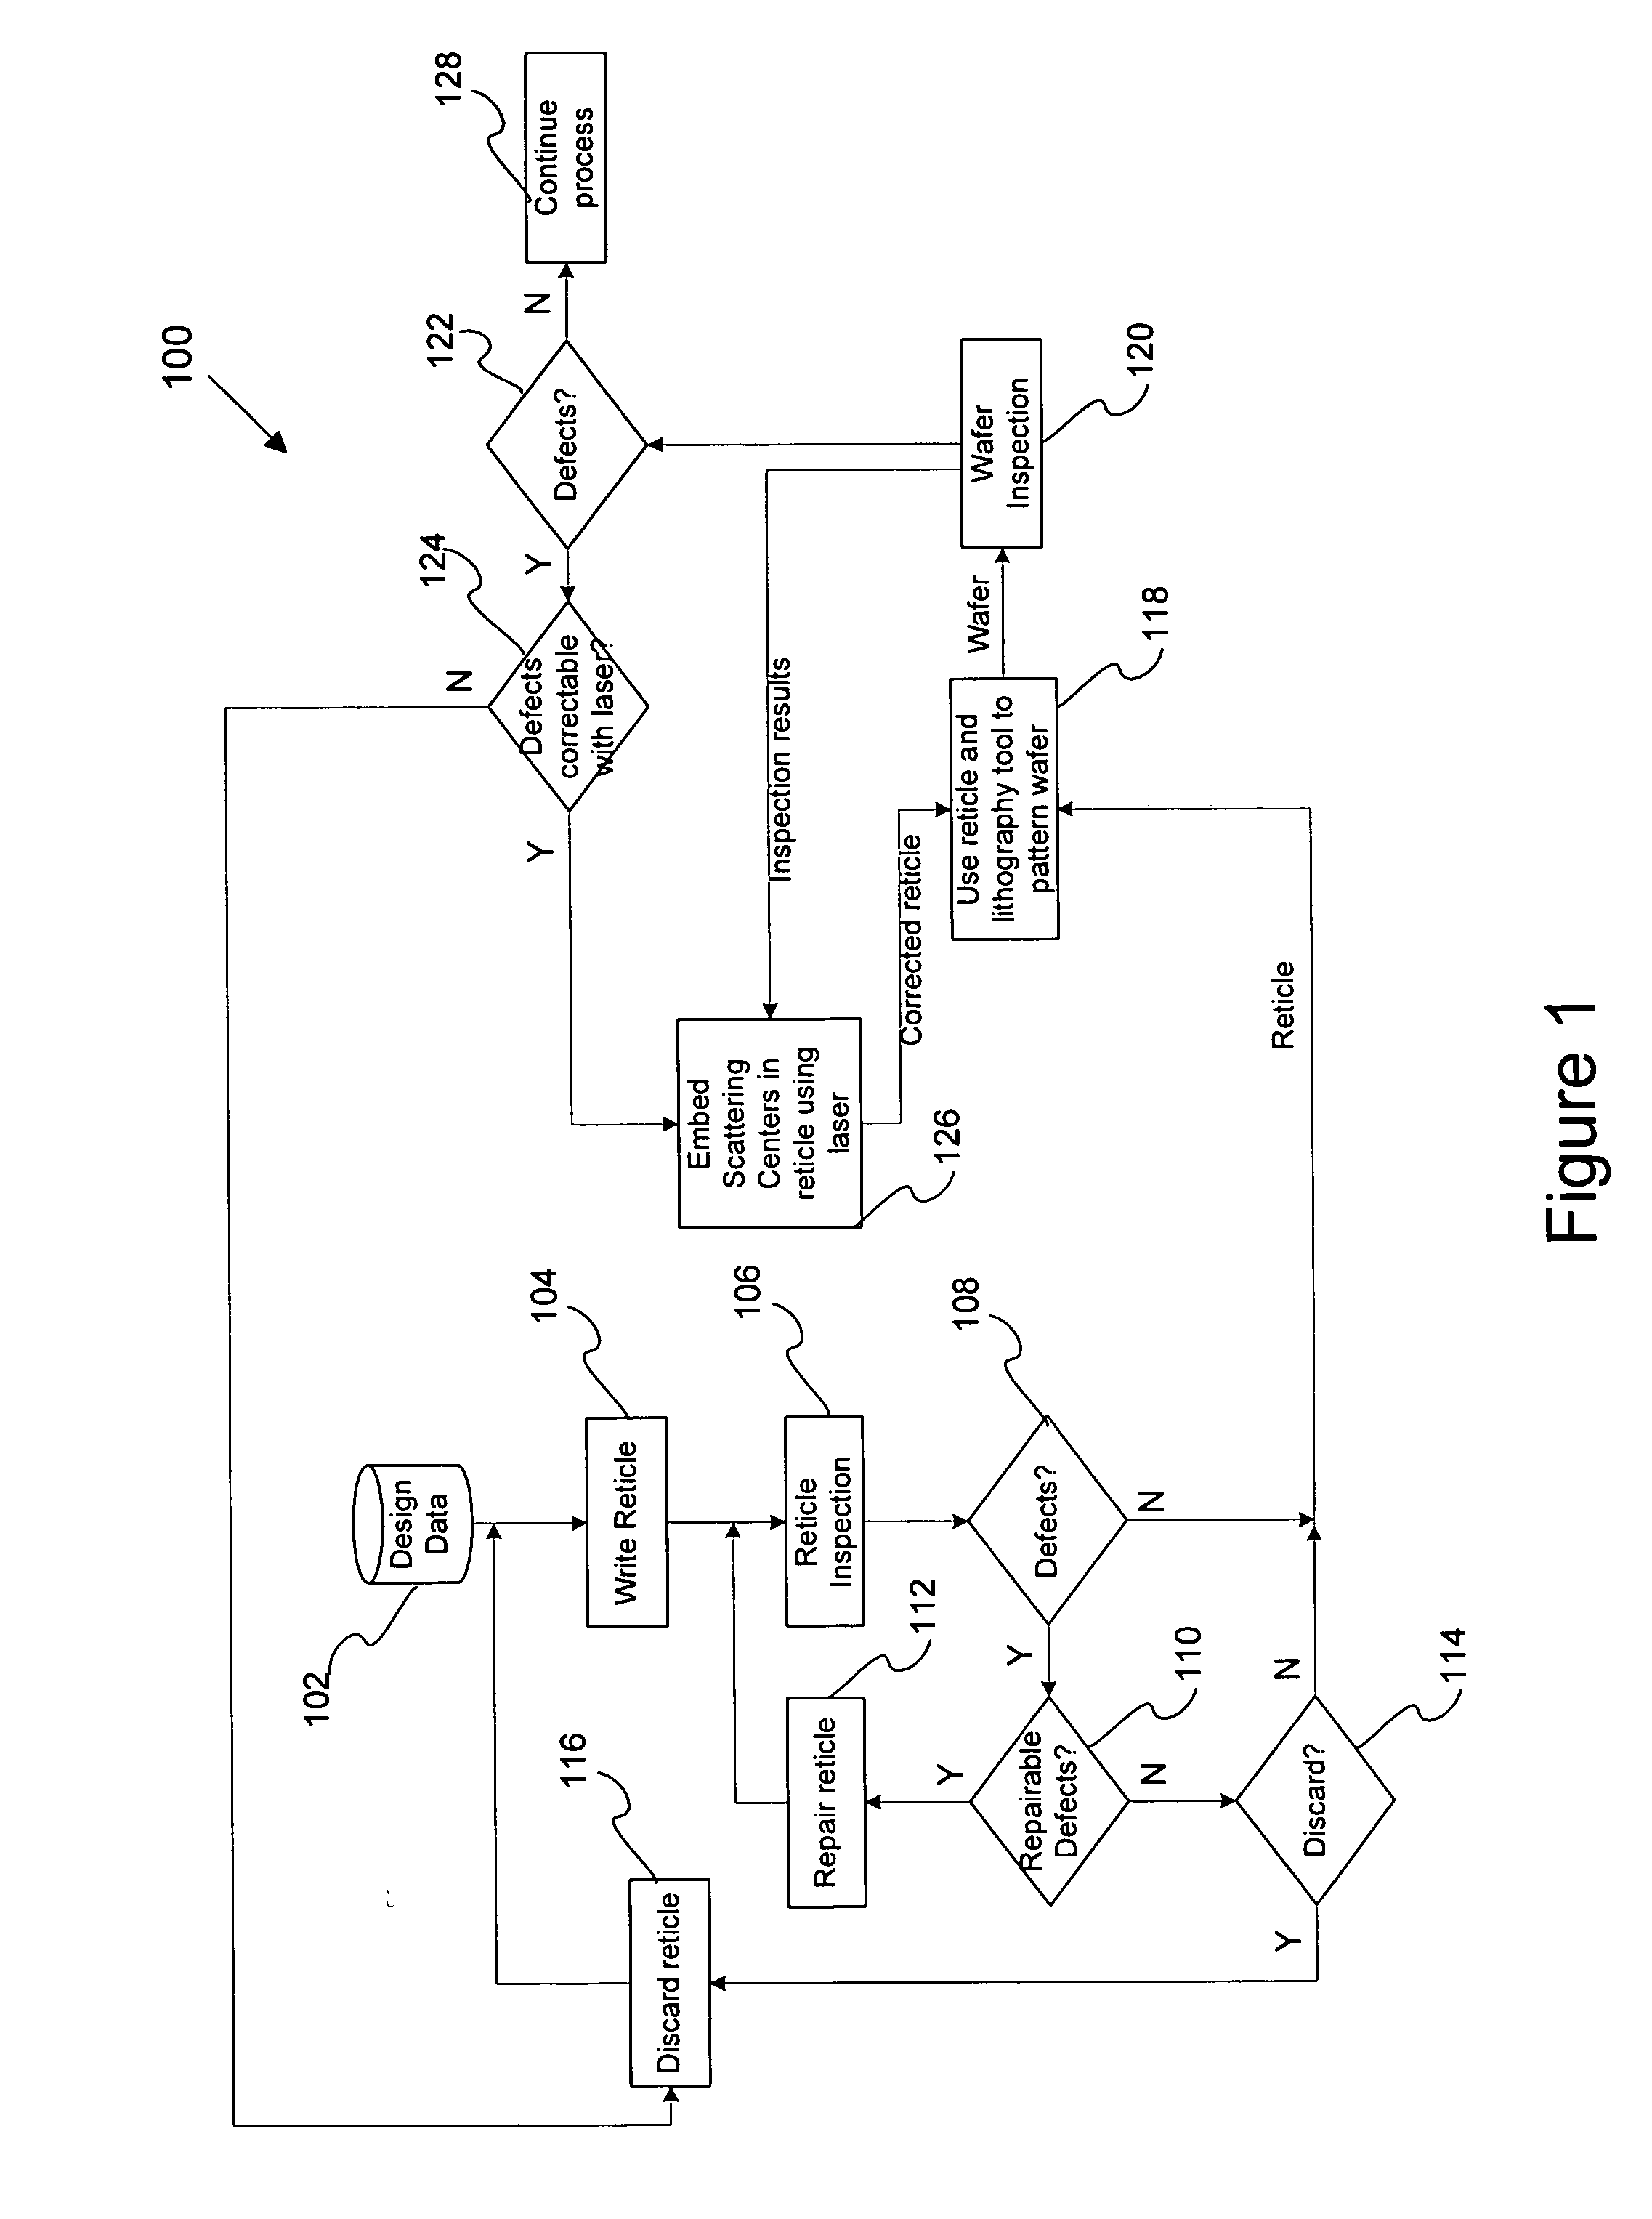 Systems and methods for modifying a reticle's optical properties